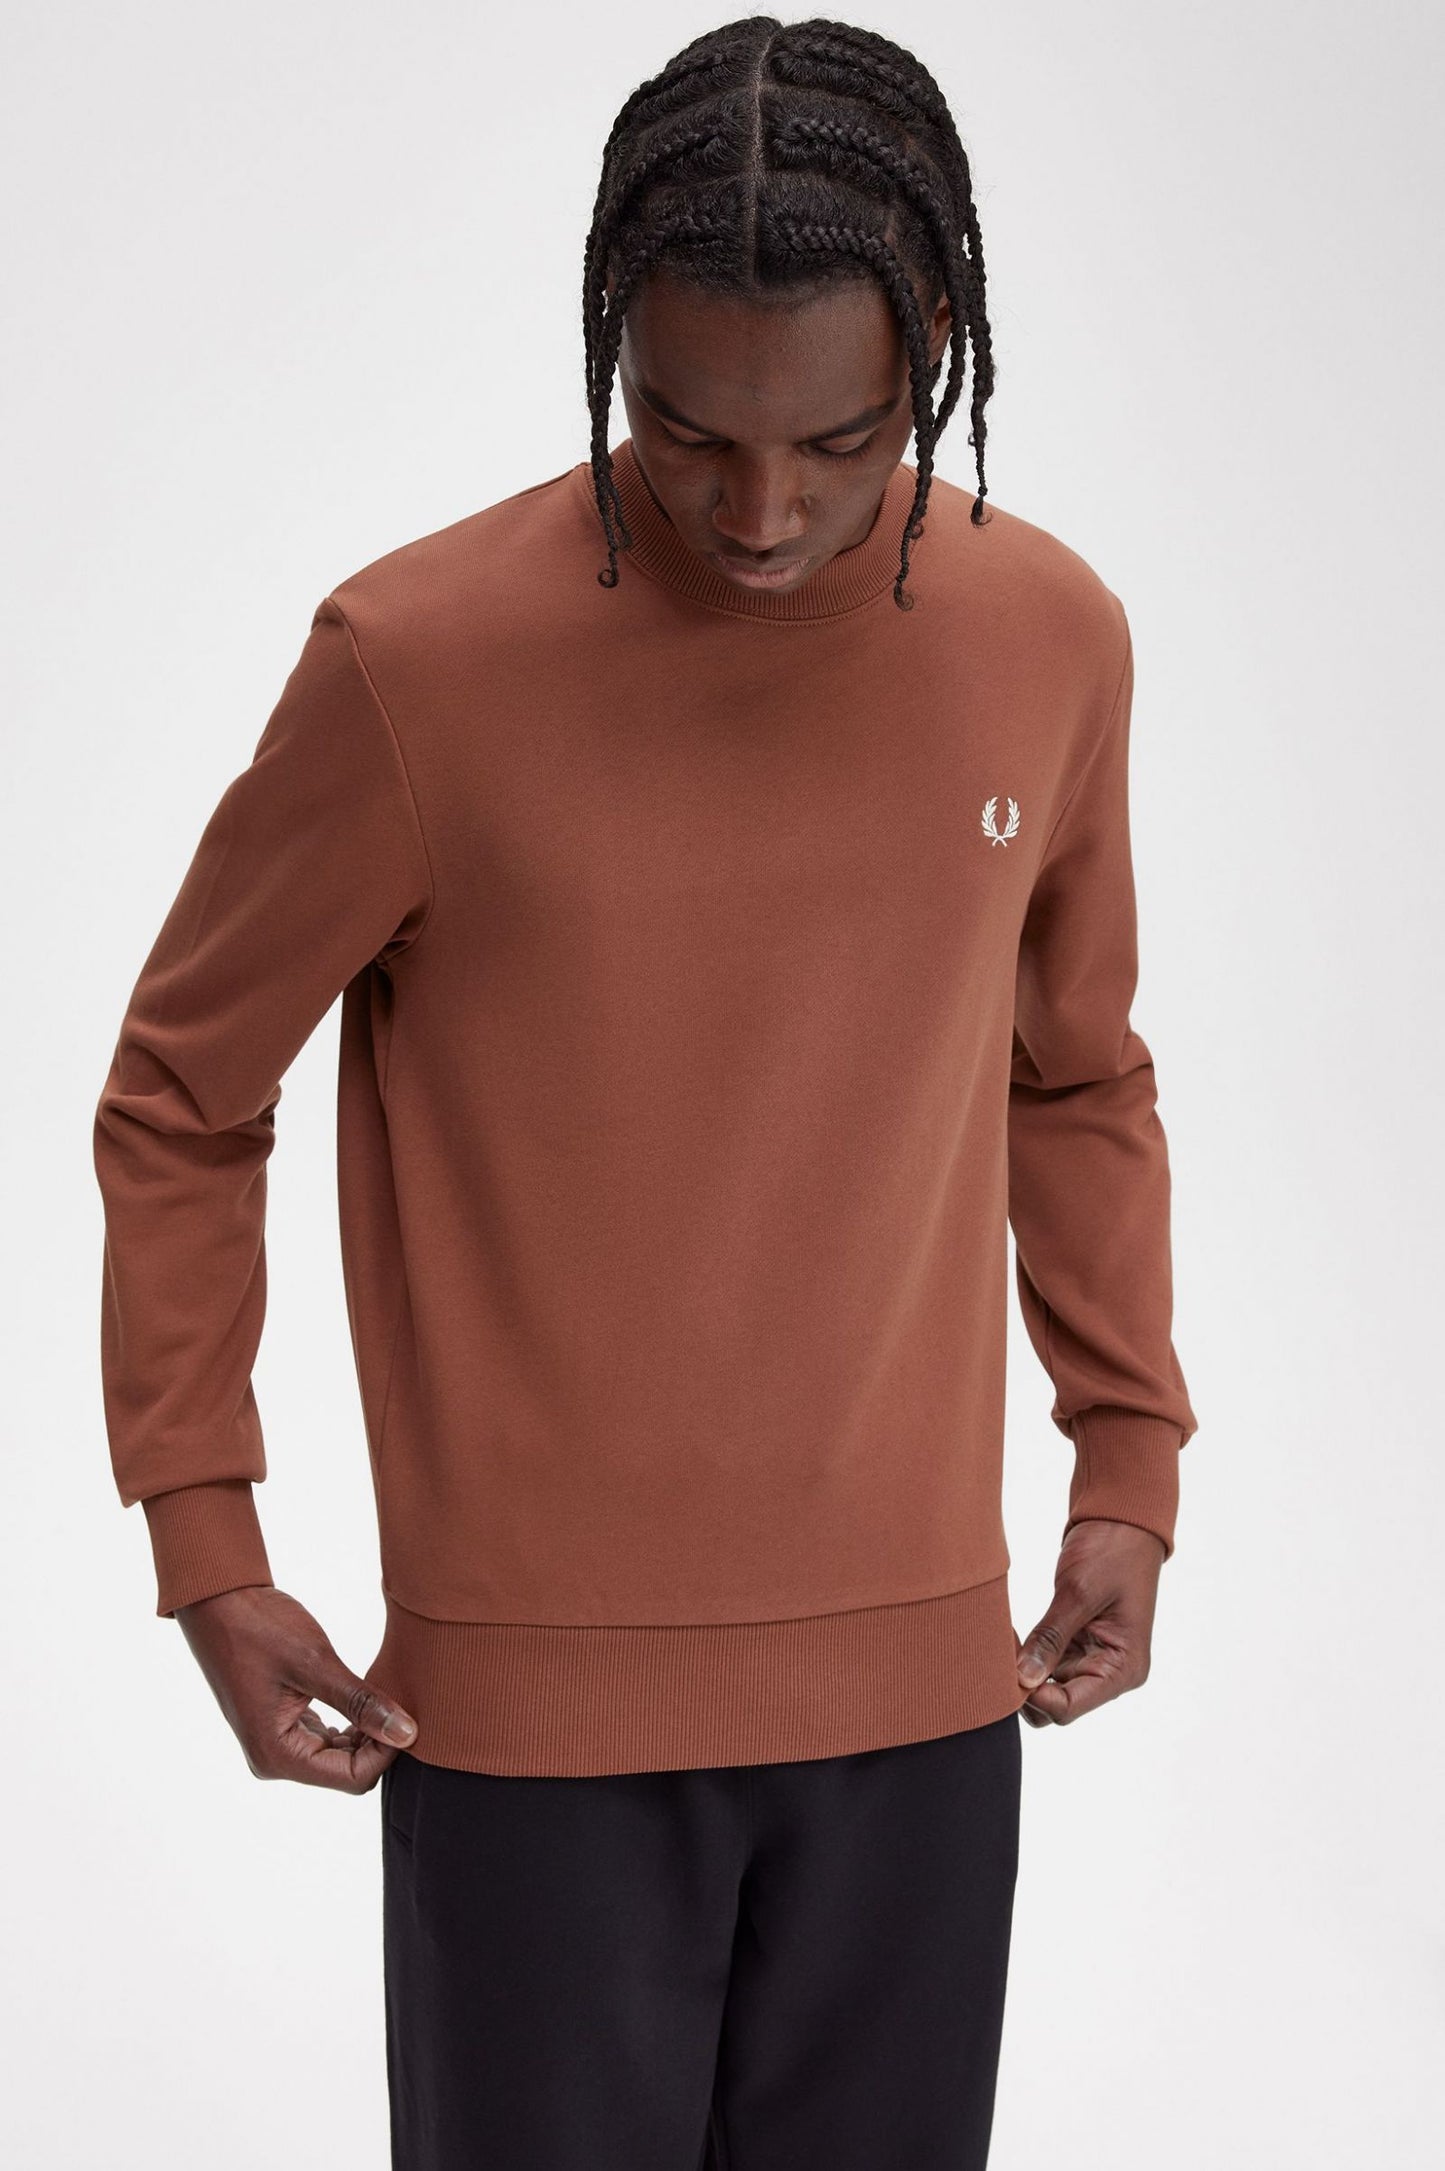 Fred Perry Rave Graphic Sweatshirt Whiskey brown